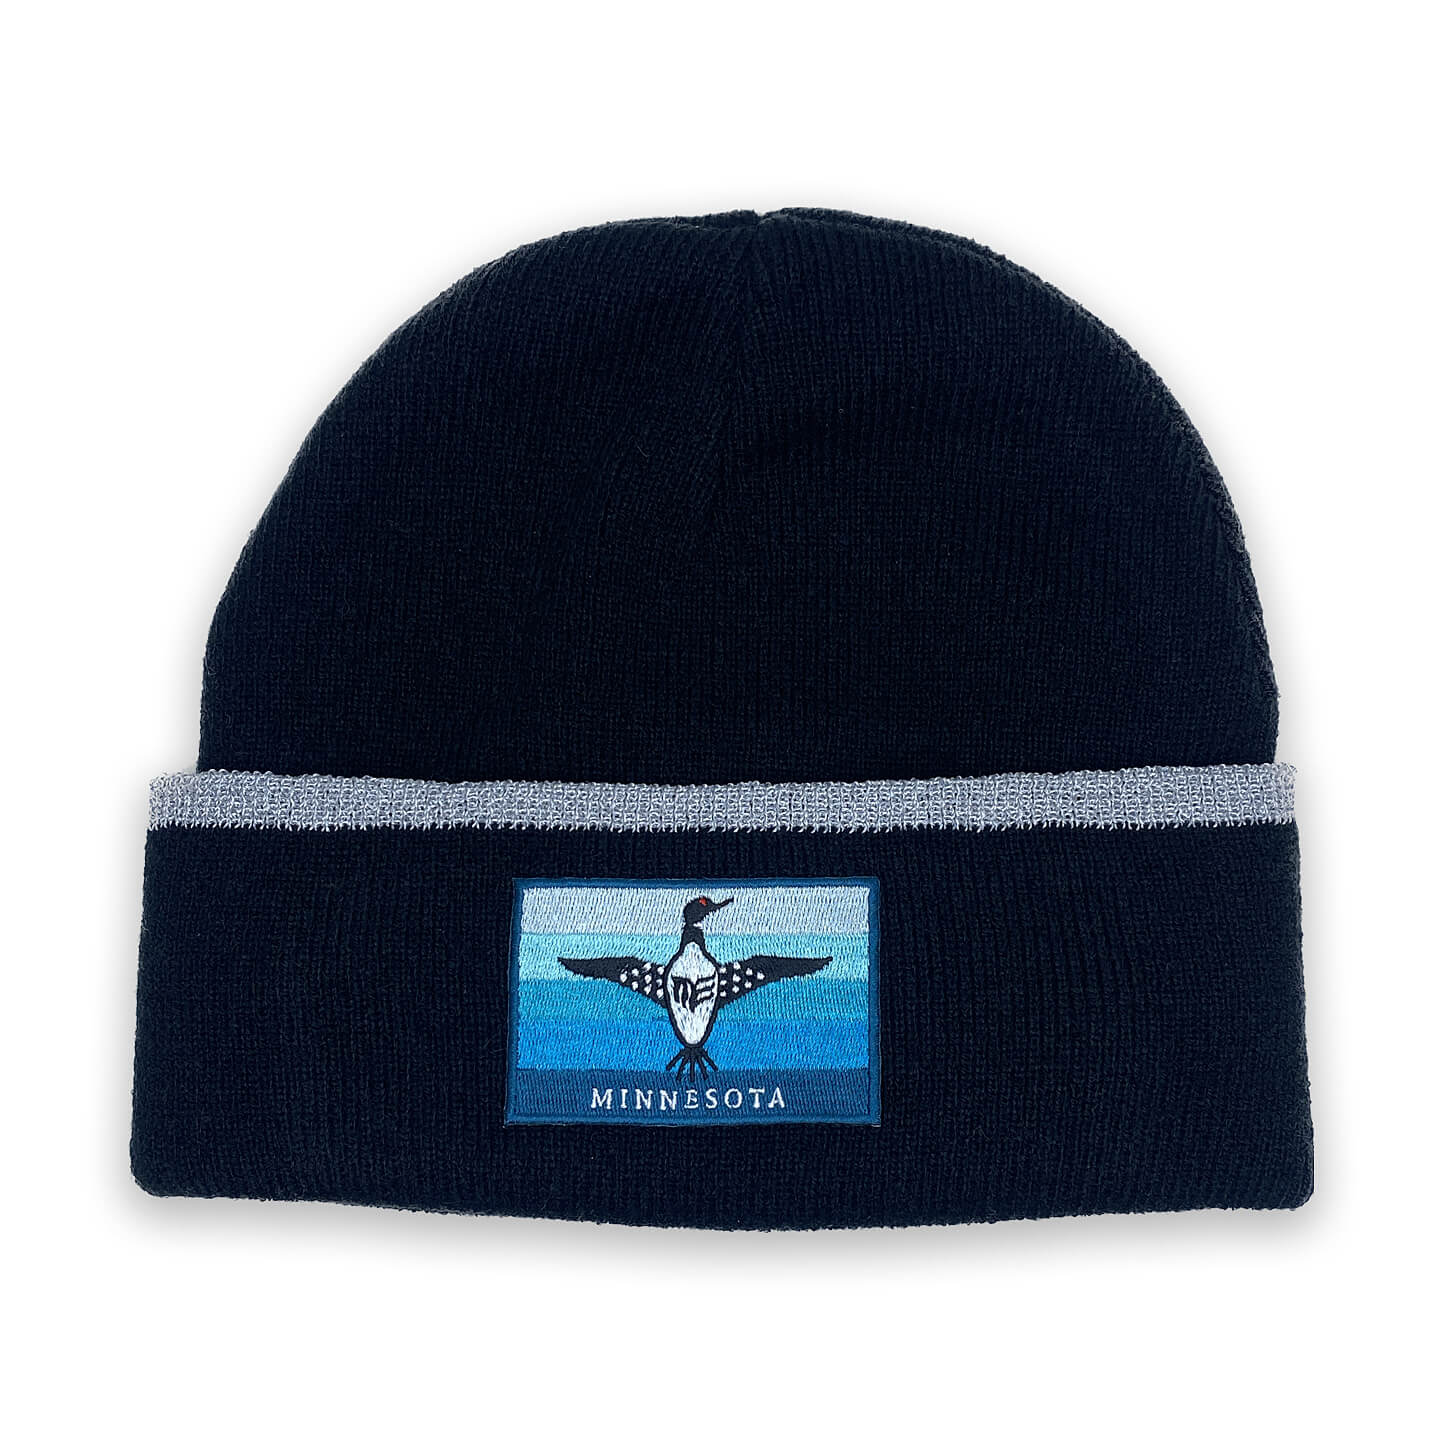 Fleece Lined Cuffed beanie in Black with Blue Loon Embroidery Patch